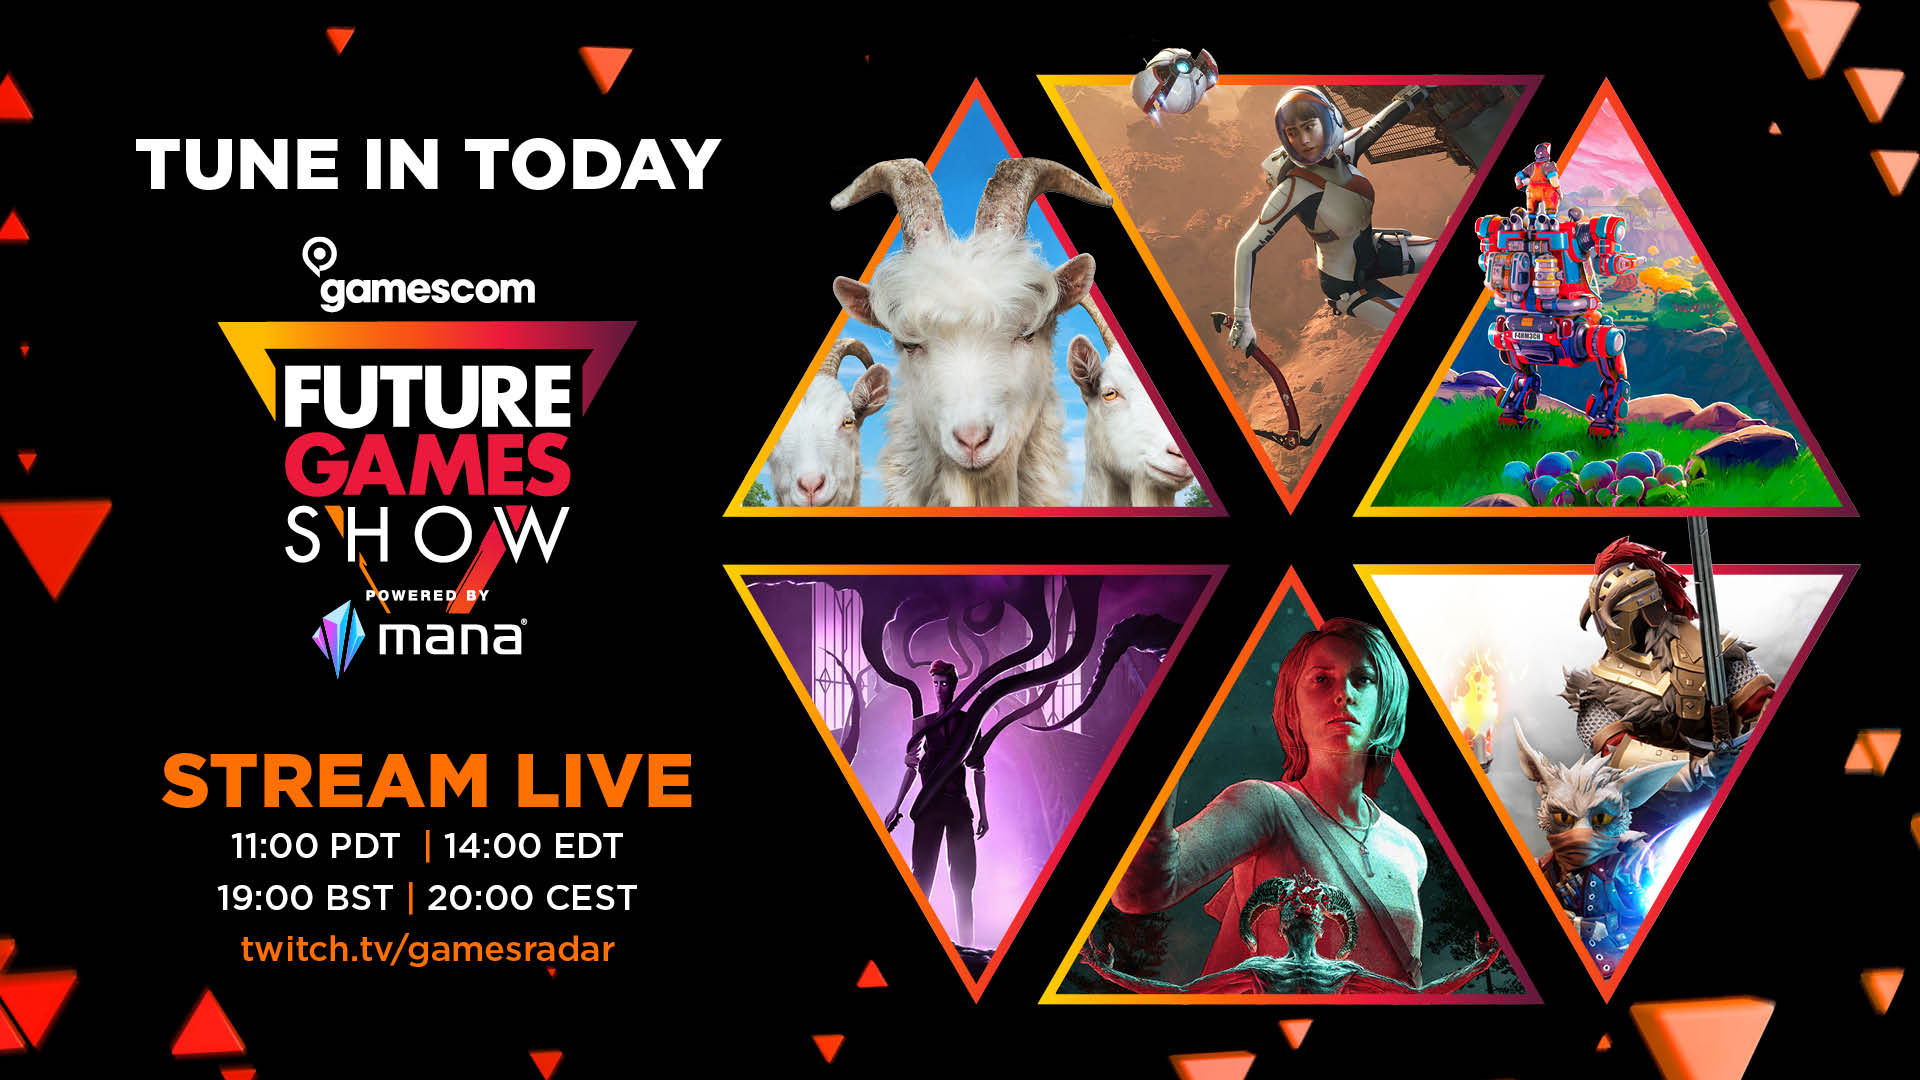 The Future Games Show